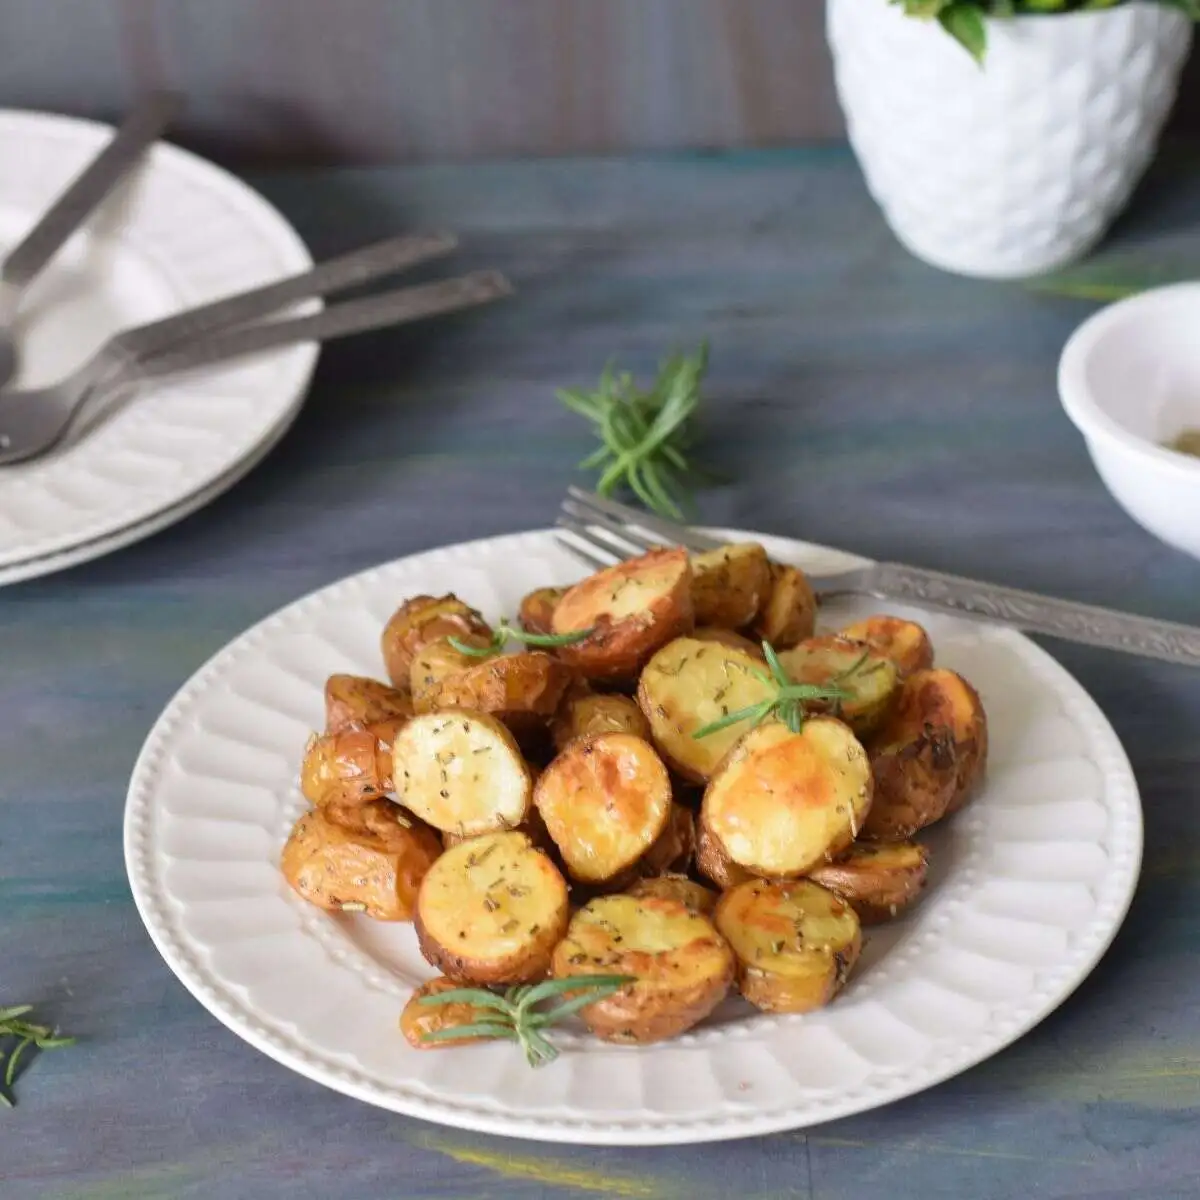 crispy roasted baby potatoes with rosemary served on a white plate along with fork